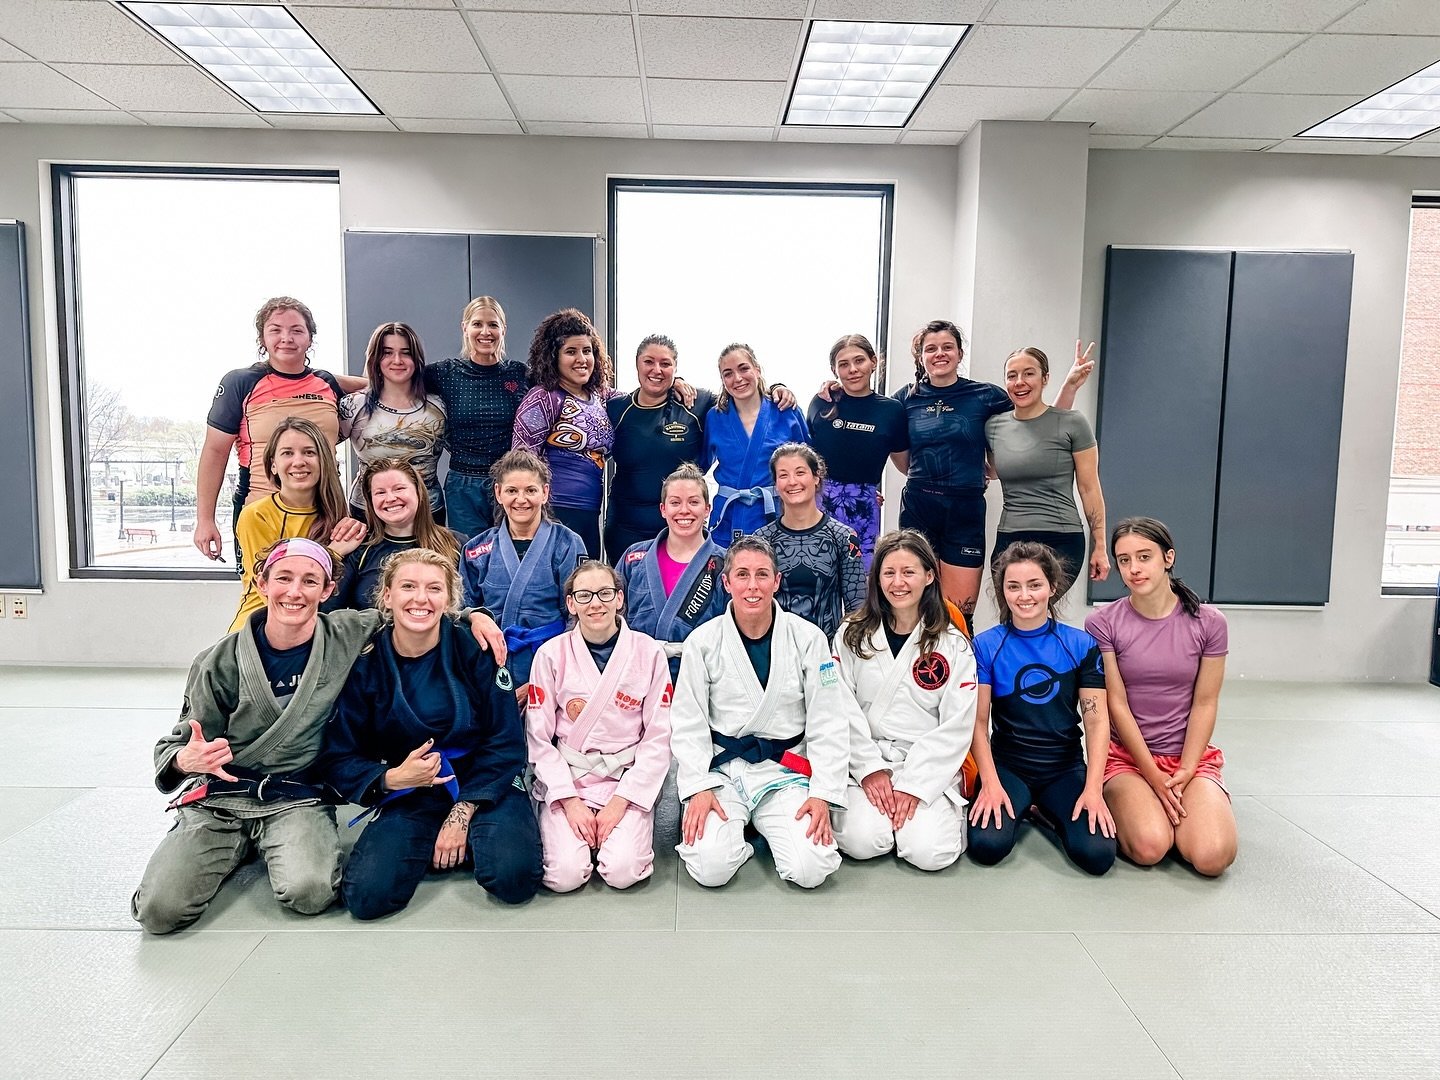 Such a great time hosting women&rsquo;s open mat thanks to @femalegrapplingco! We already can&rsquo;t wait for the next one 😄👏🏼

##fortitude #kravmaga #bjj #downtown #neenah #wisconsin #selfdefense #fighting #fitness #getinshape #gohomesafe #commu